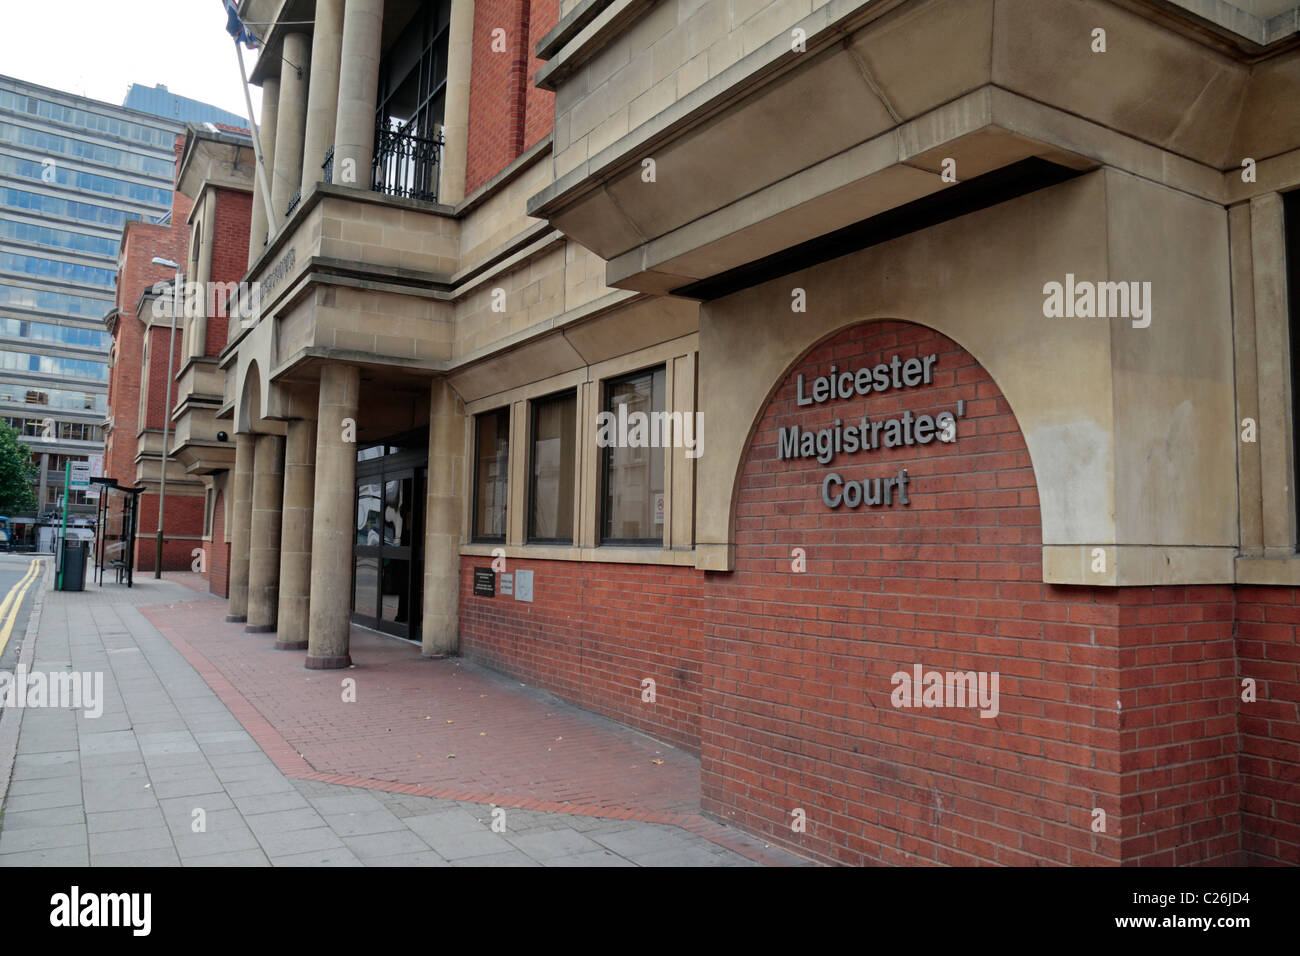 Leicester Magistrates' Court, Leicester, England. Stockfoto